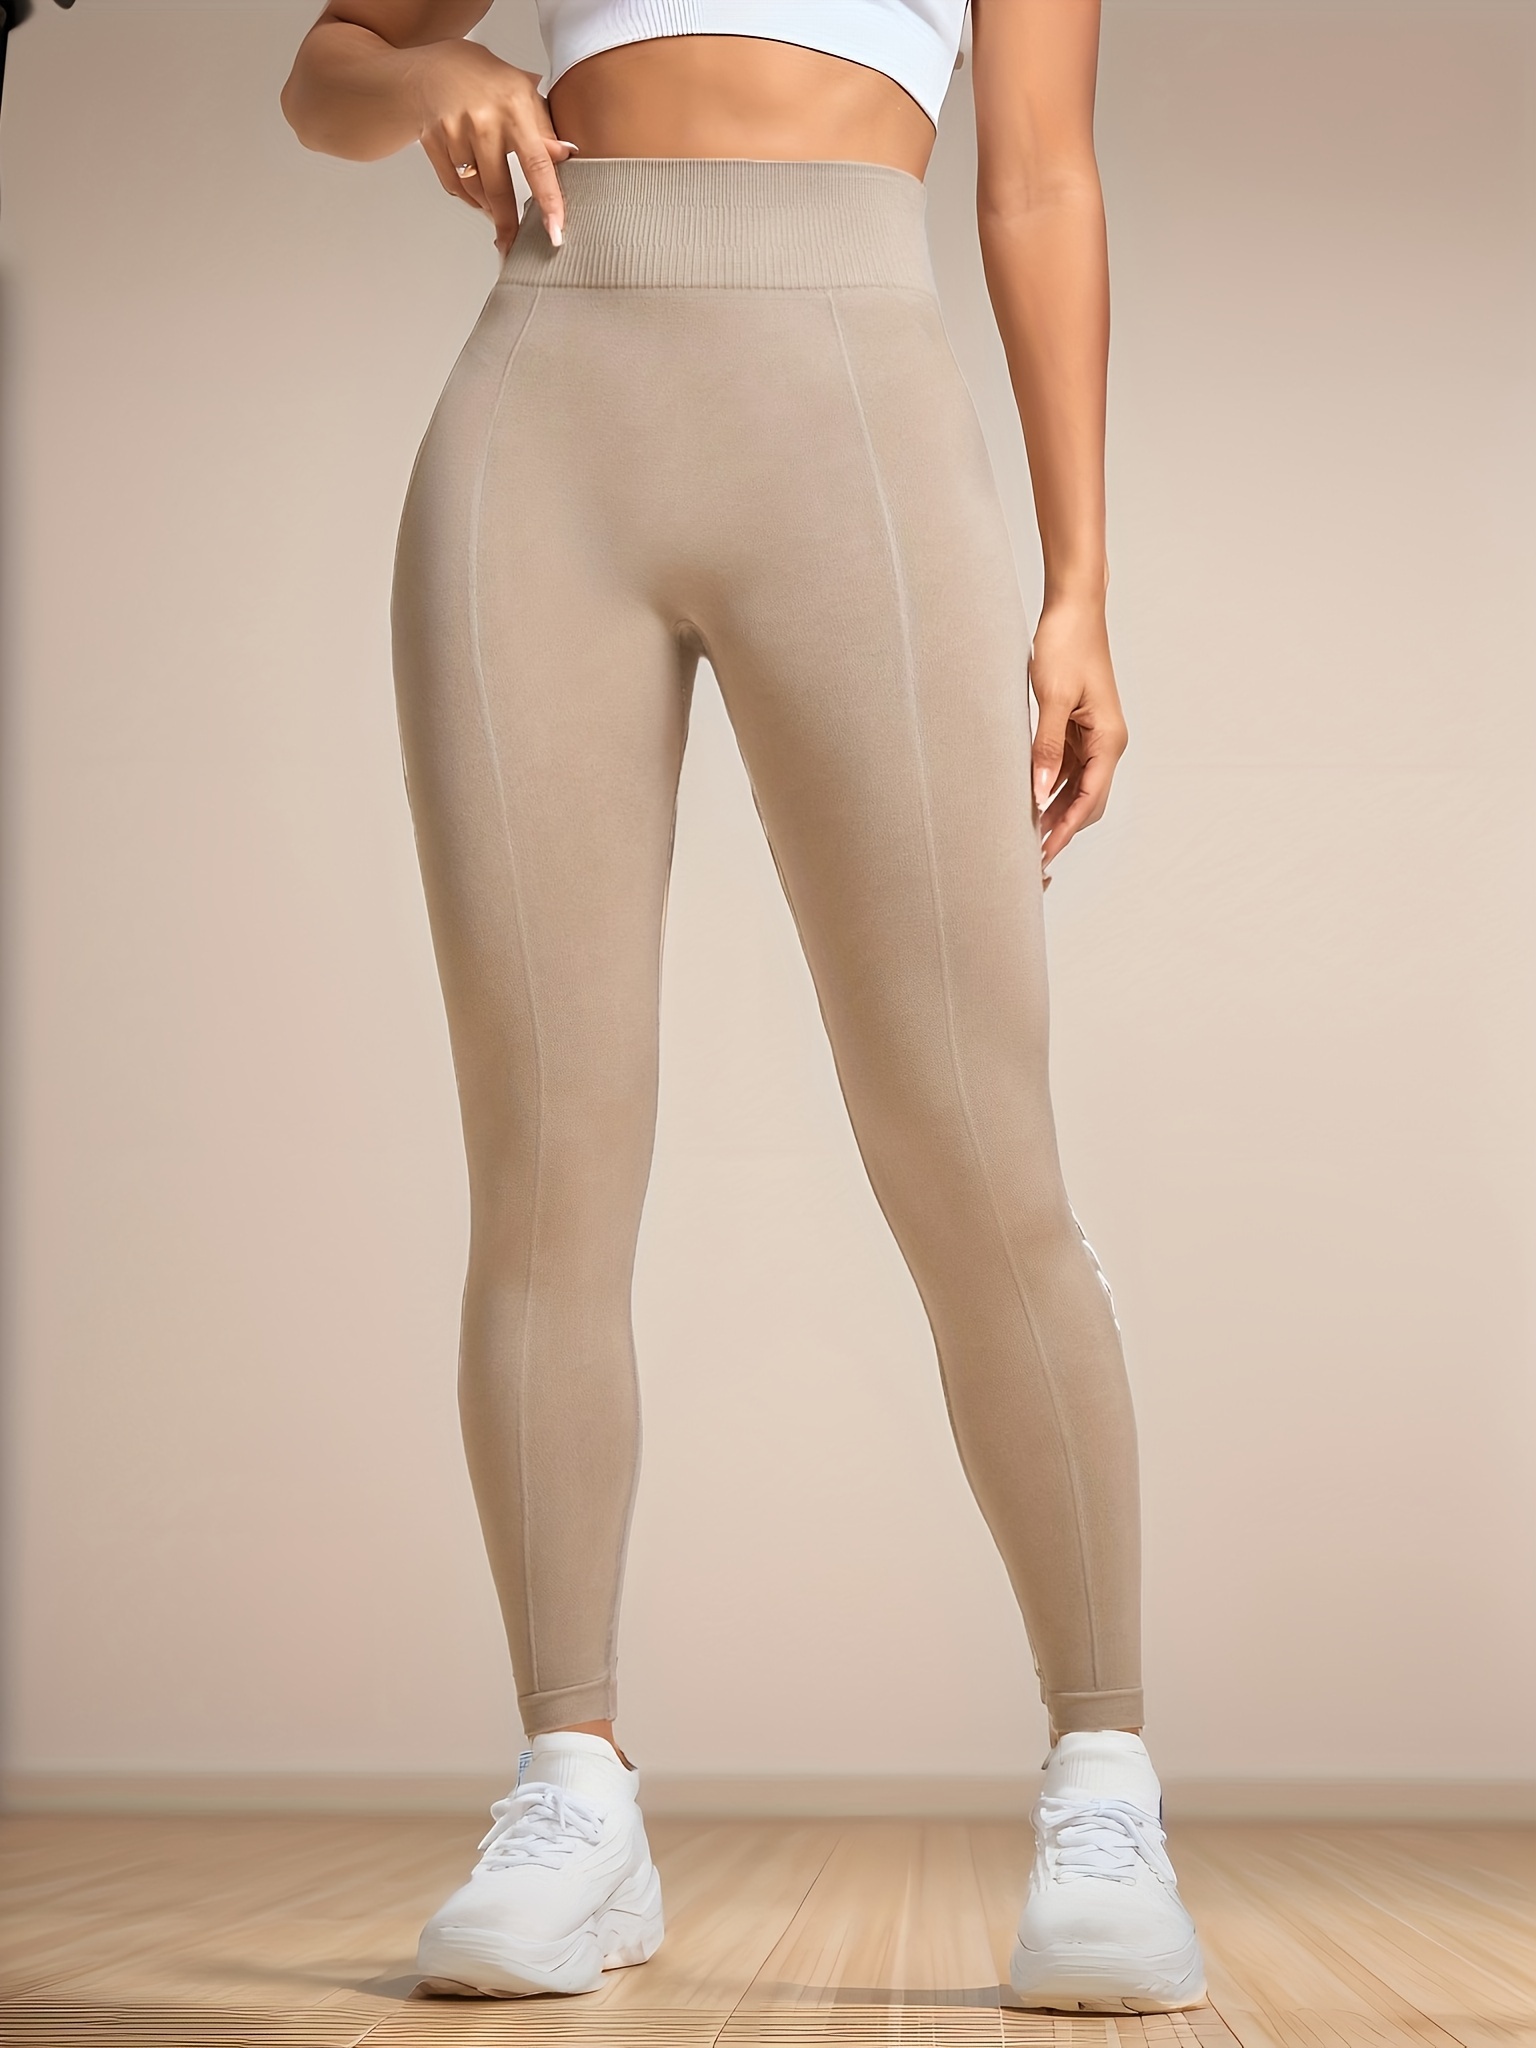 SHEIN Leisure Gym Tights Absorbs Sweat Quick-Drying High Stretch